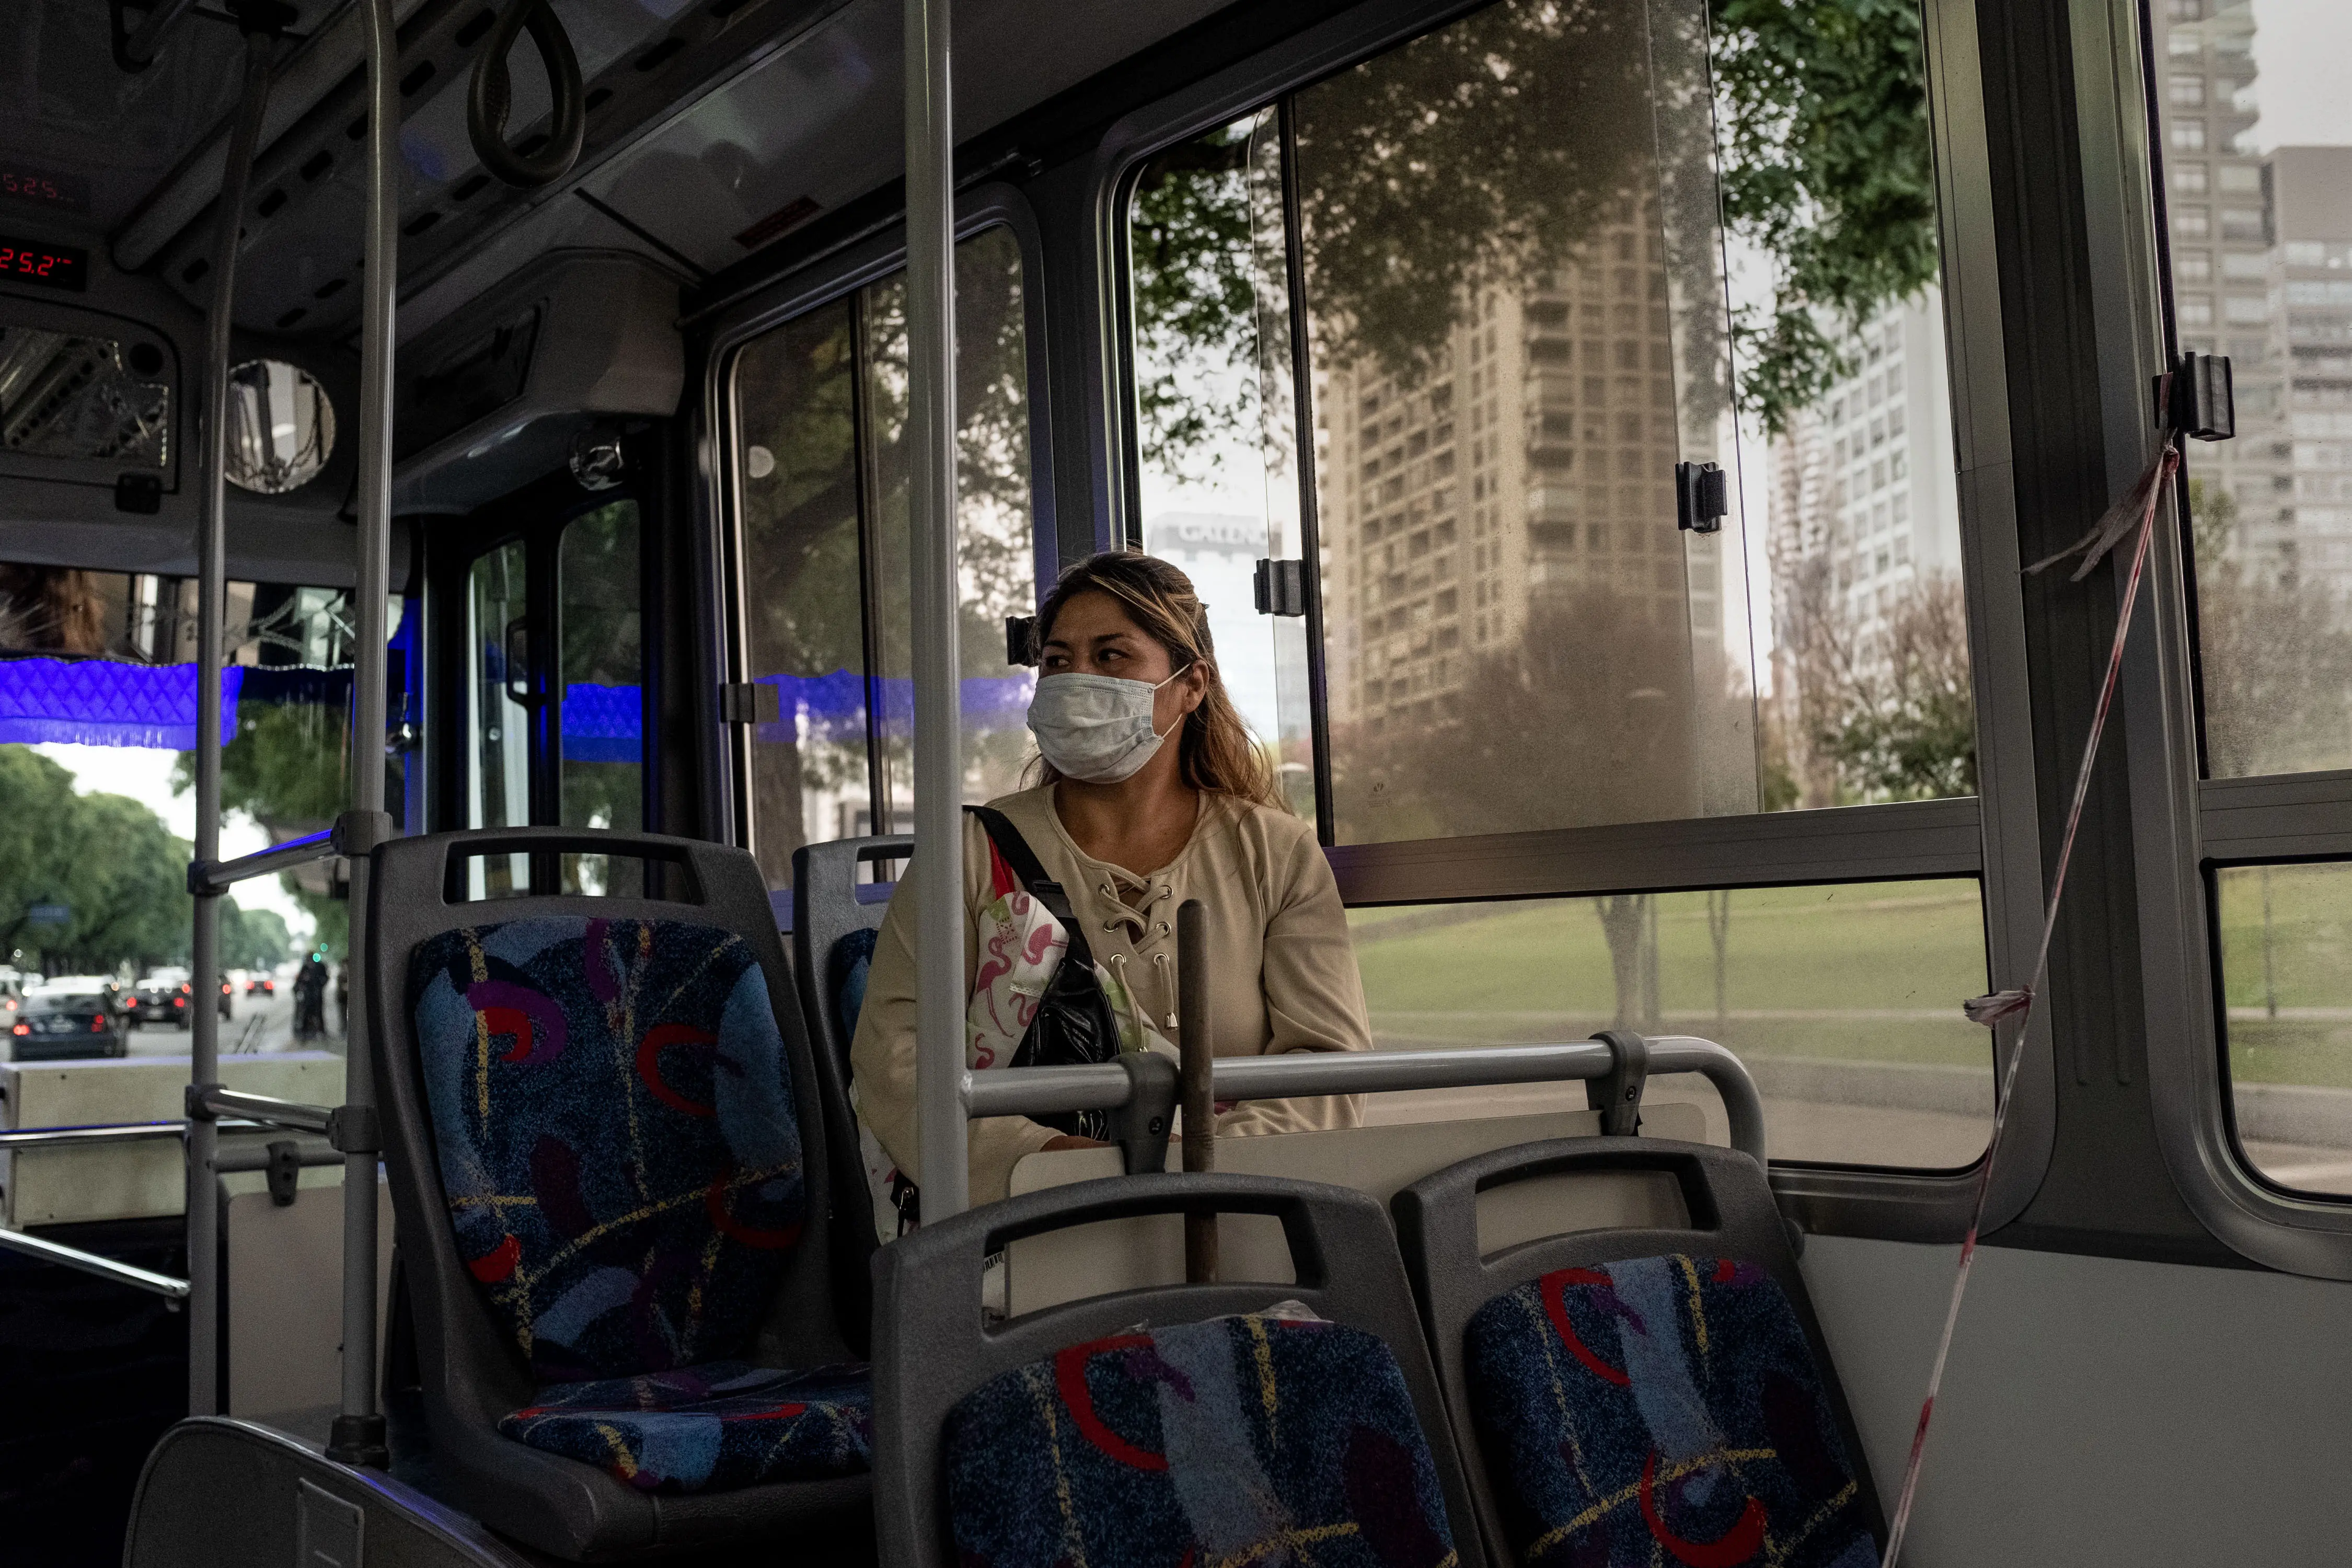 A person wearing a medical face mask sits in a bus.